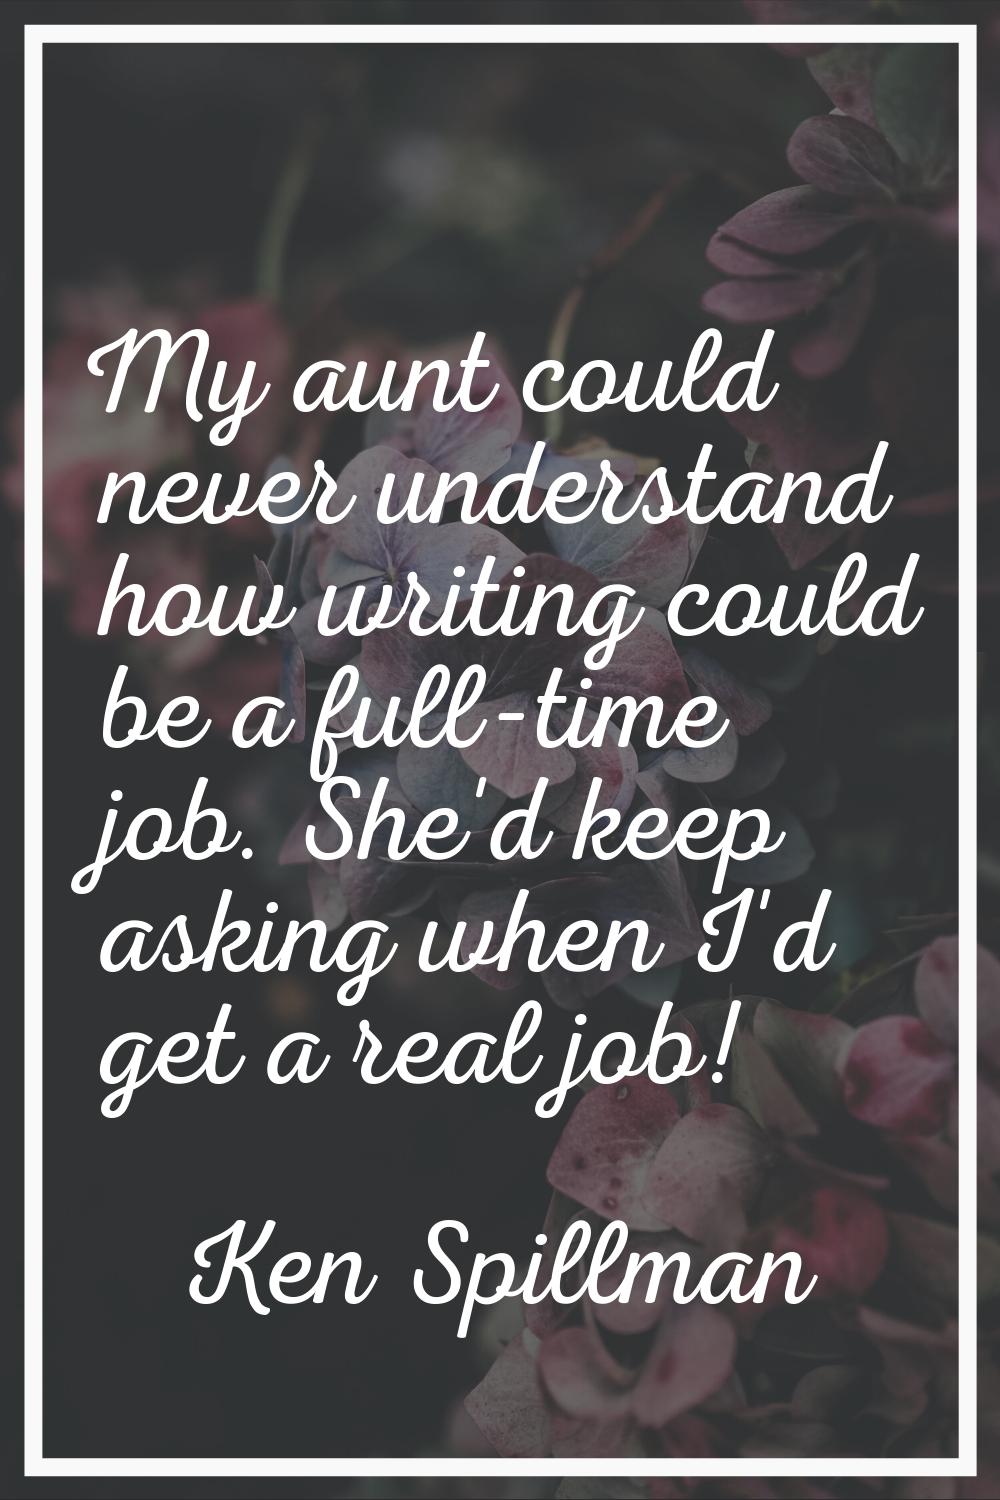 My aunt could never understand how writing could be a full-time job. She'd keep asking when I'd get